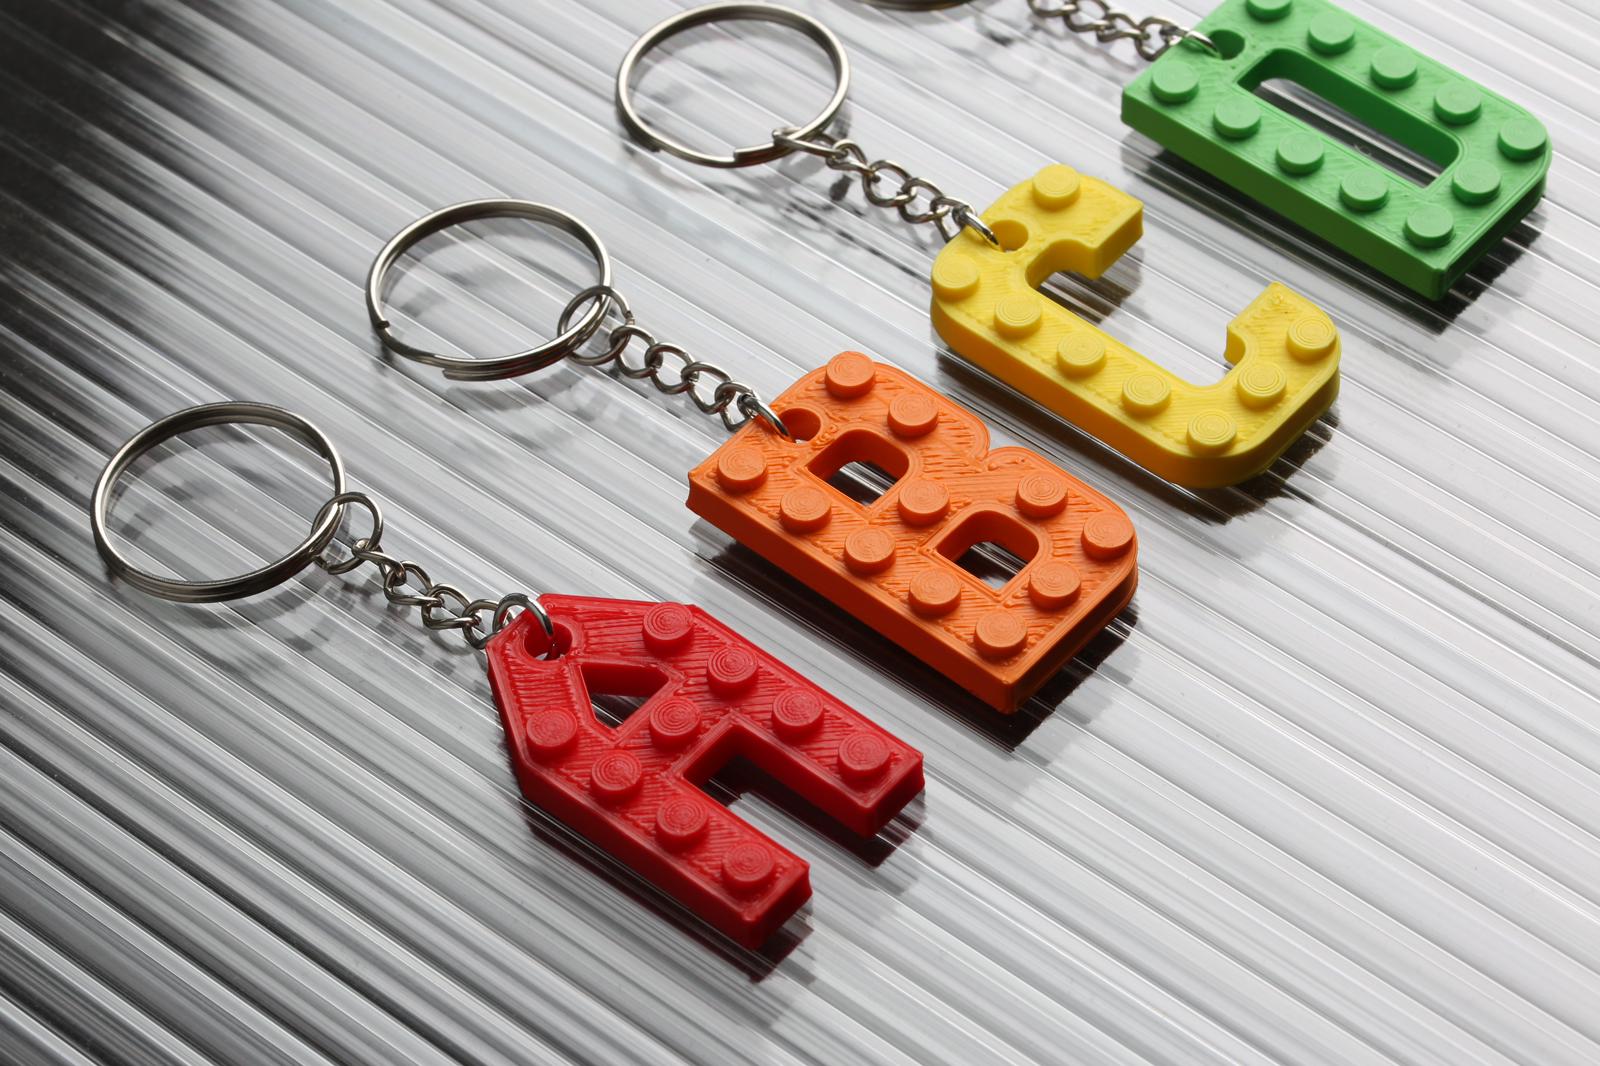 Lego Compatible alphabet keyring  Choice of colours and letter M-X (free postage)